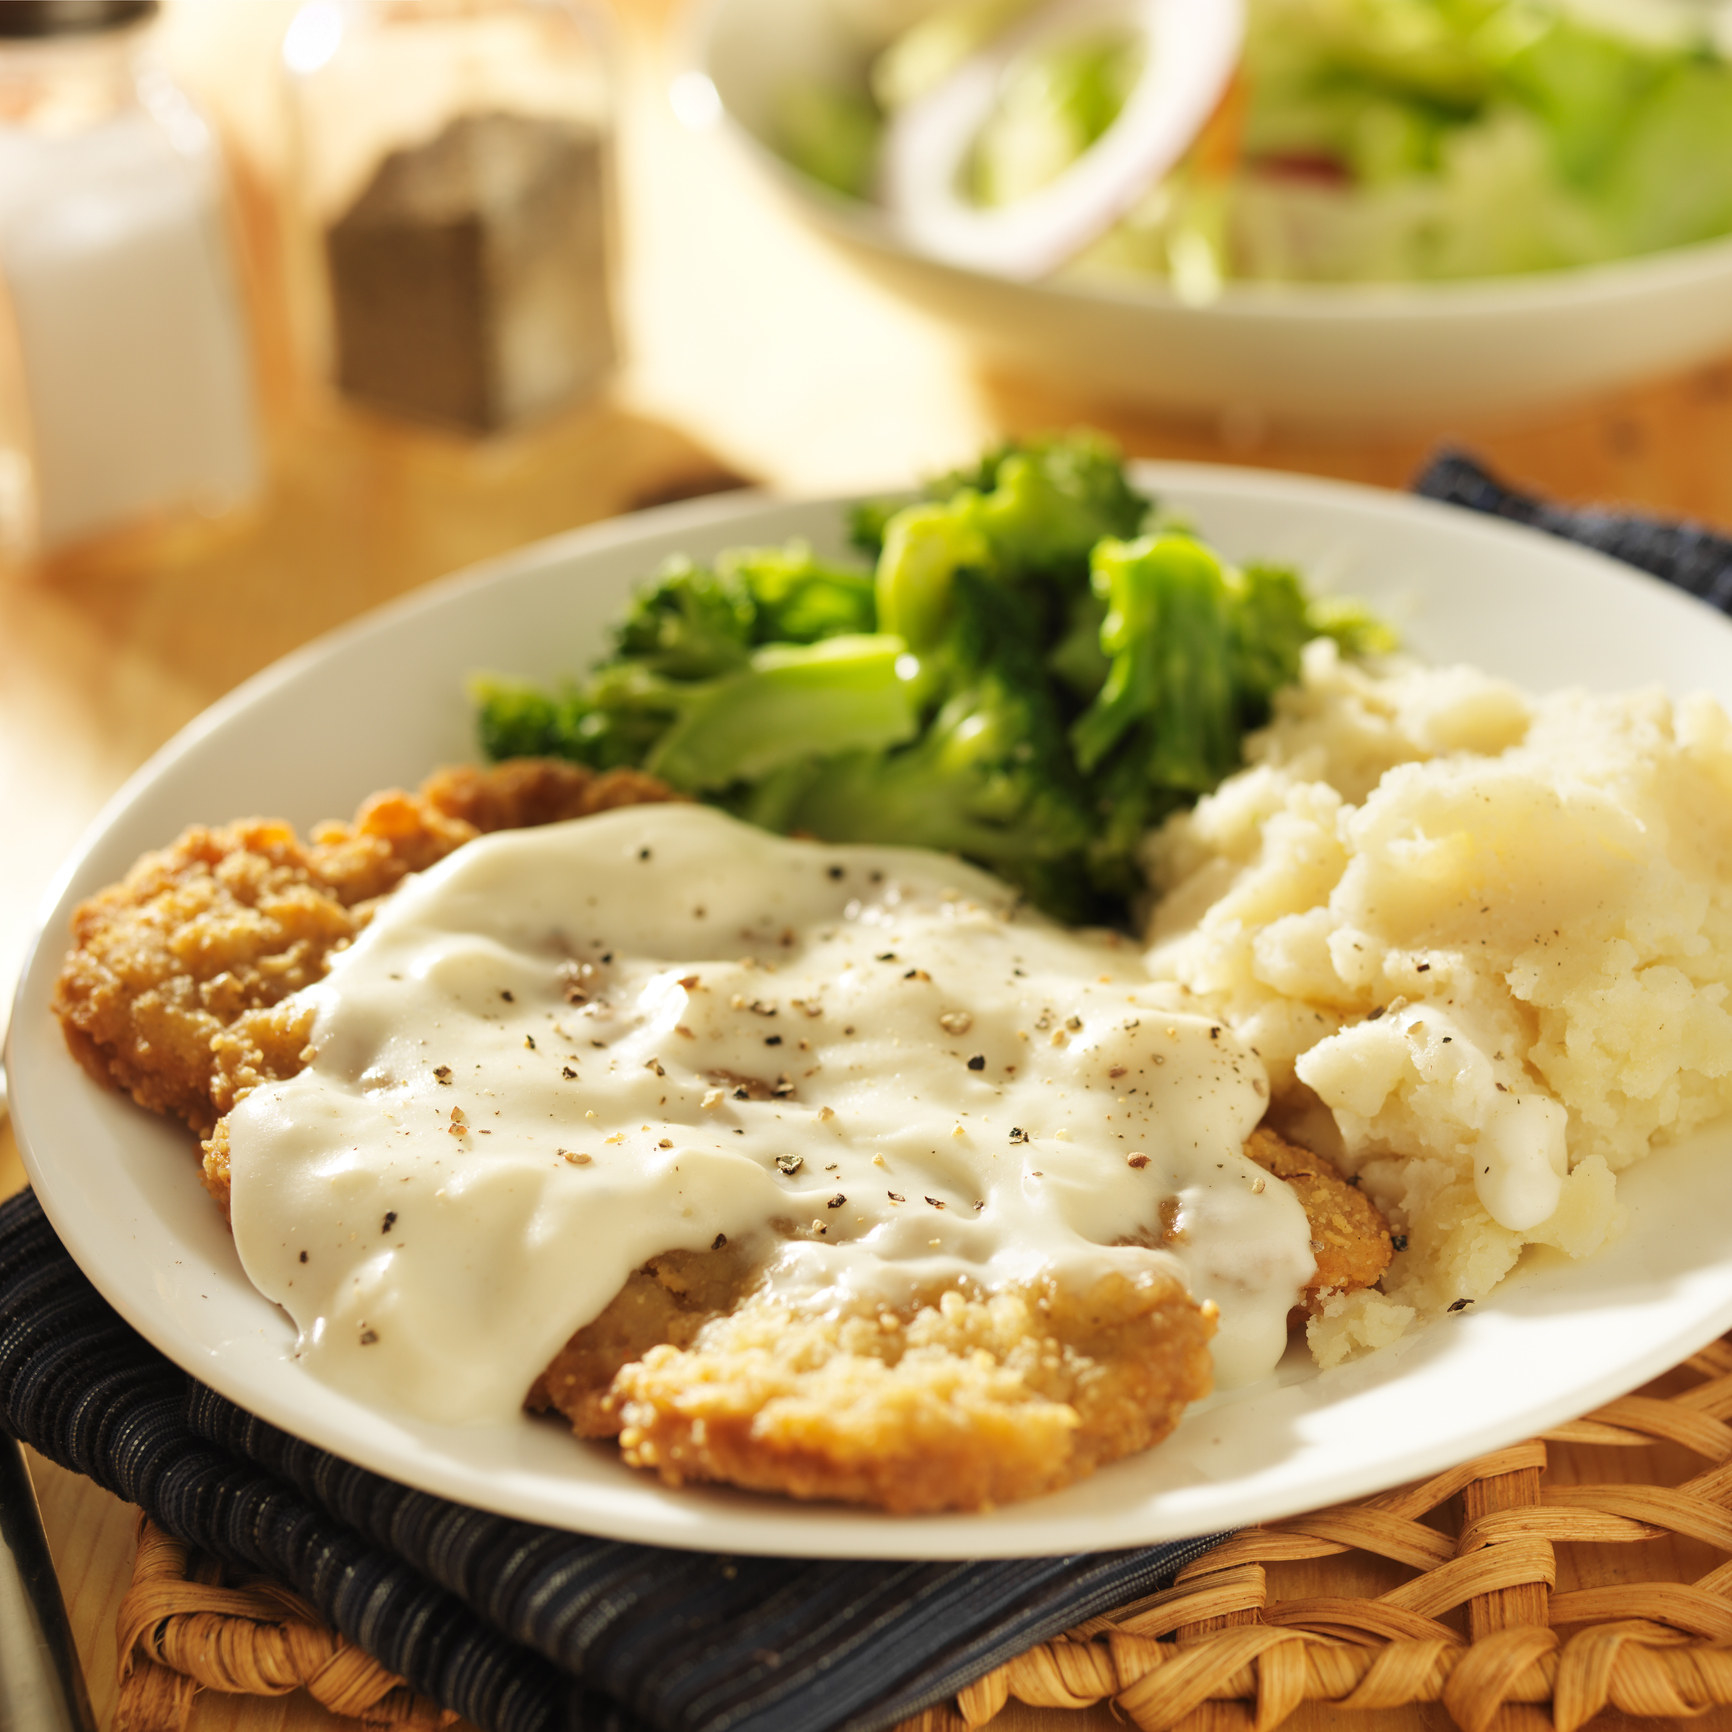 Country fried steak with Southern-style peppered milk gravy